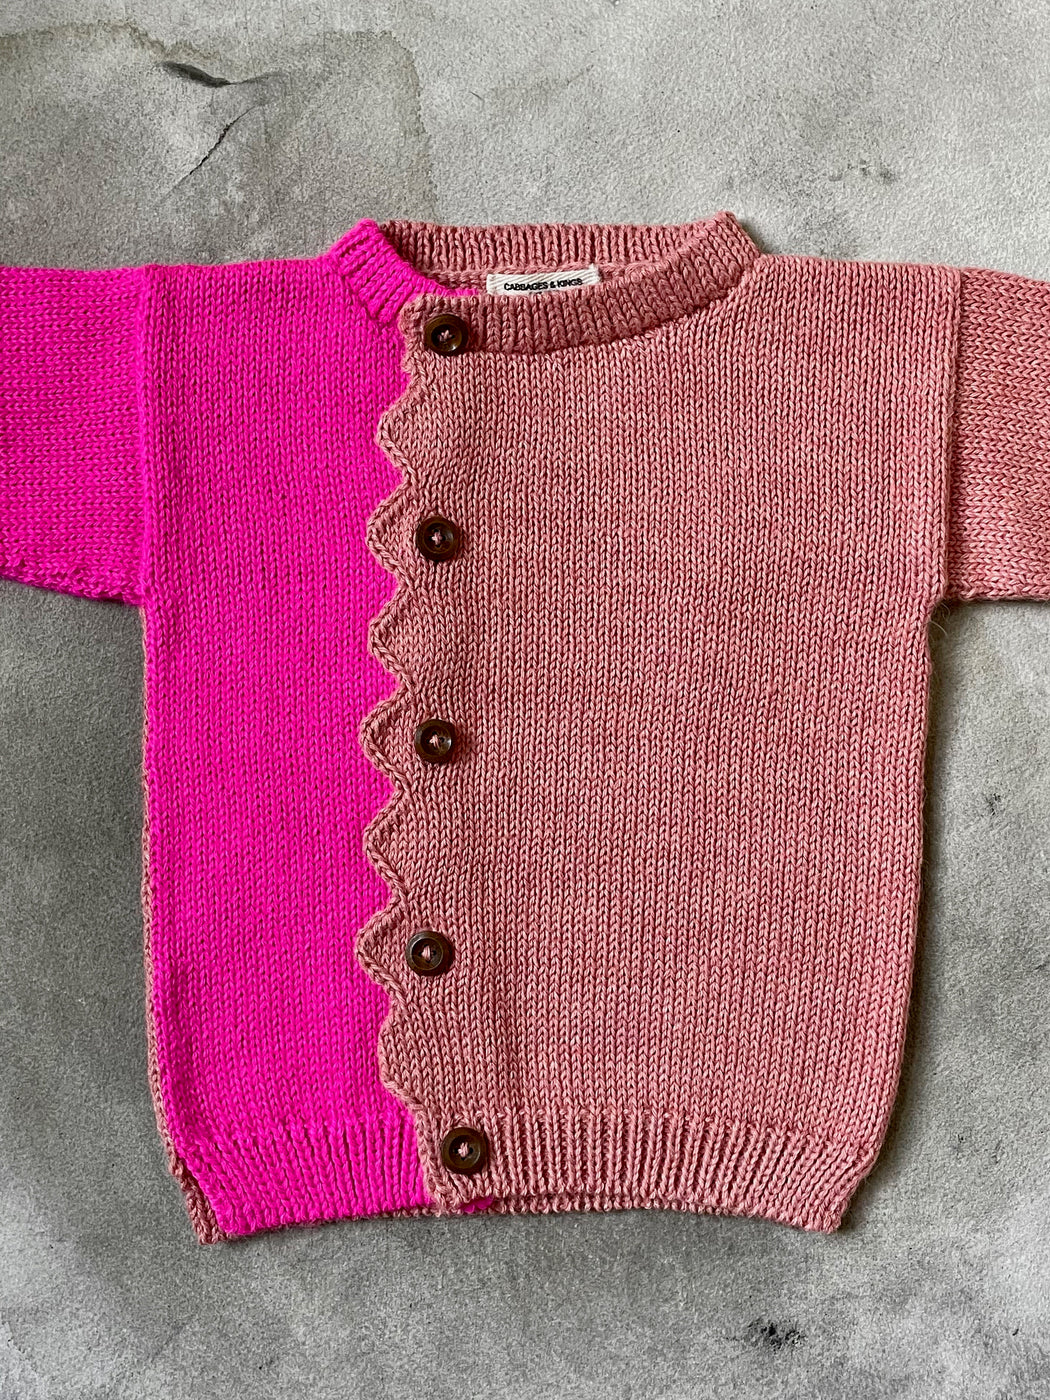 Cabbages & Kings "Zig Zag" Cardigan (6 months - 2 years)